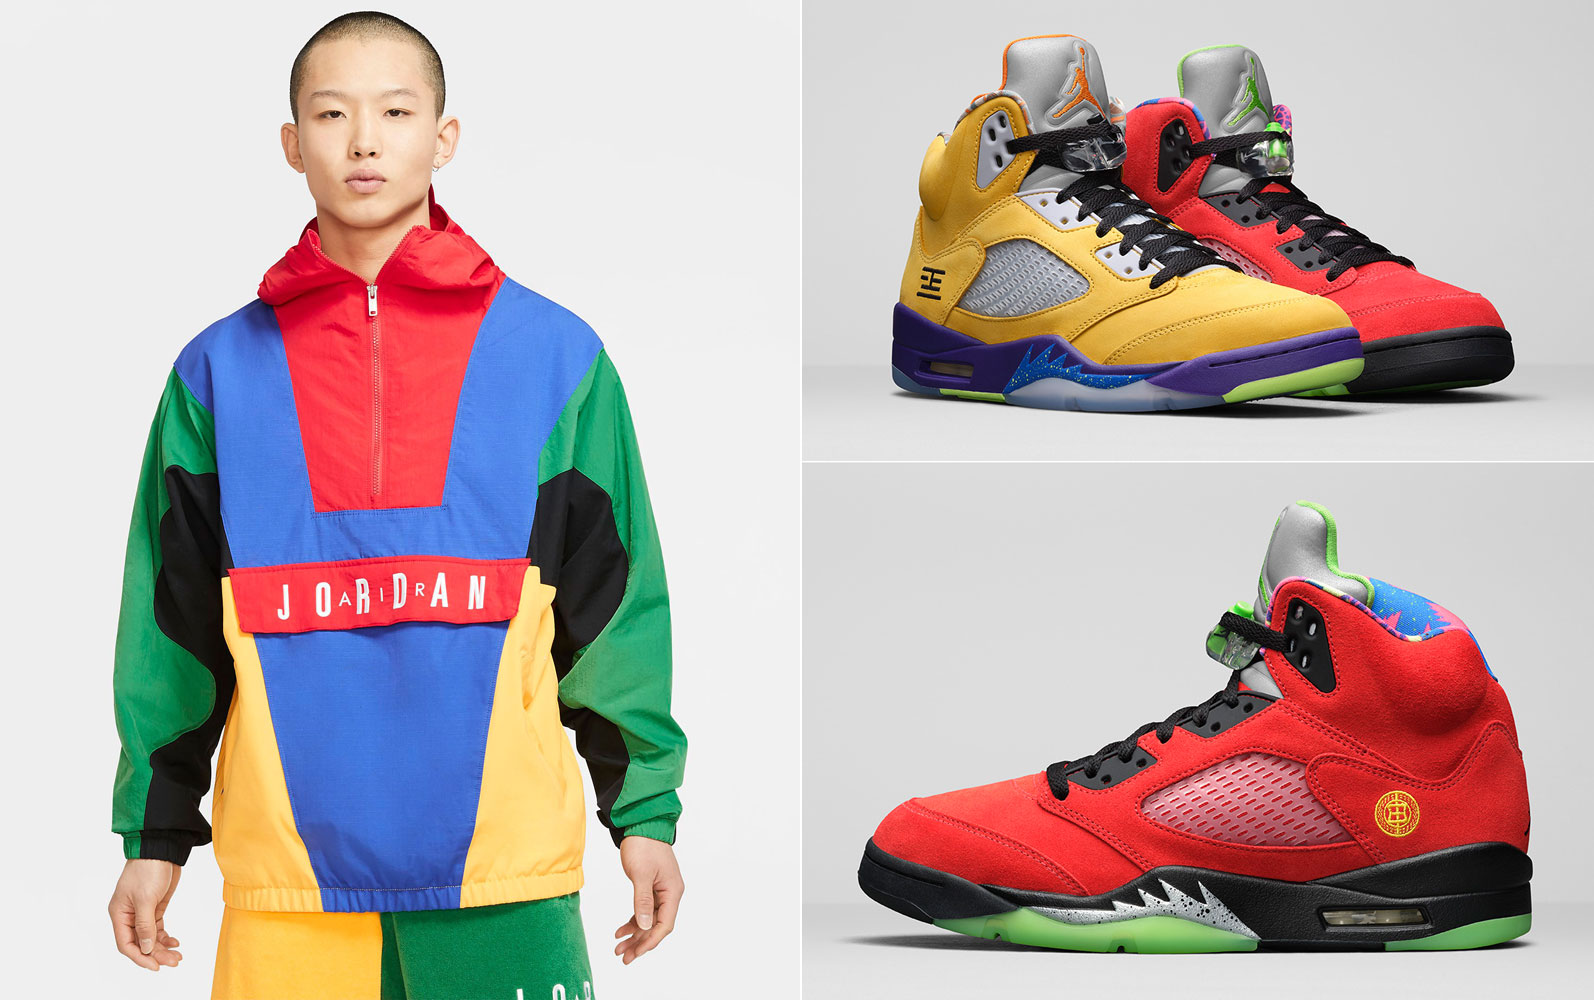 Air Jordan 5 What The Jacket to Match 